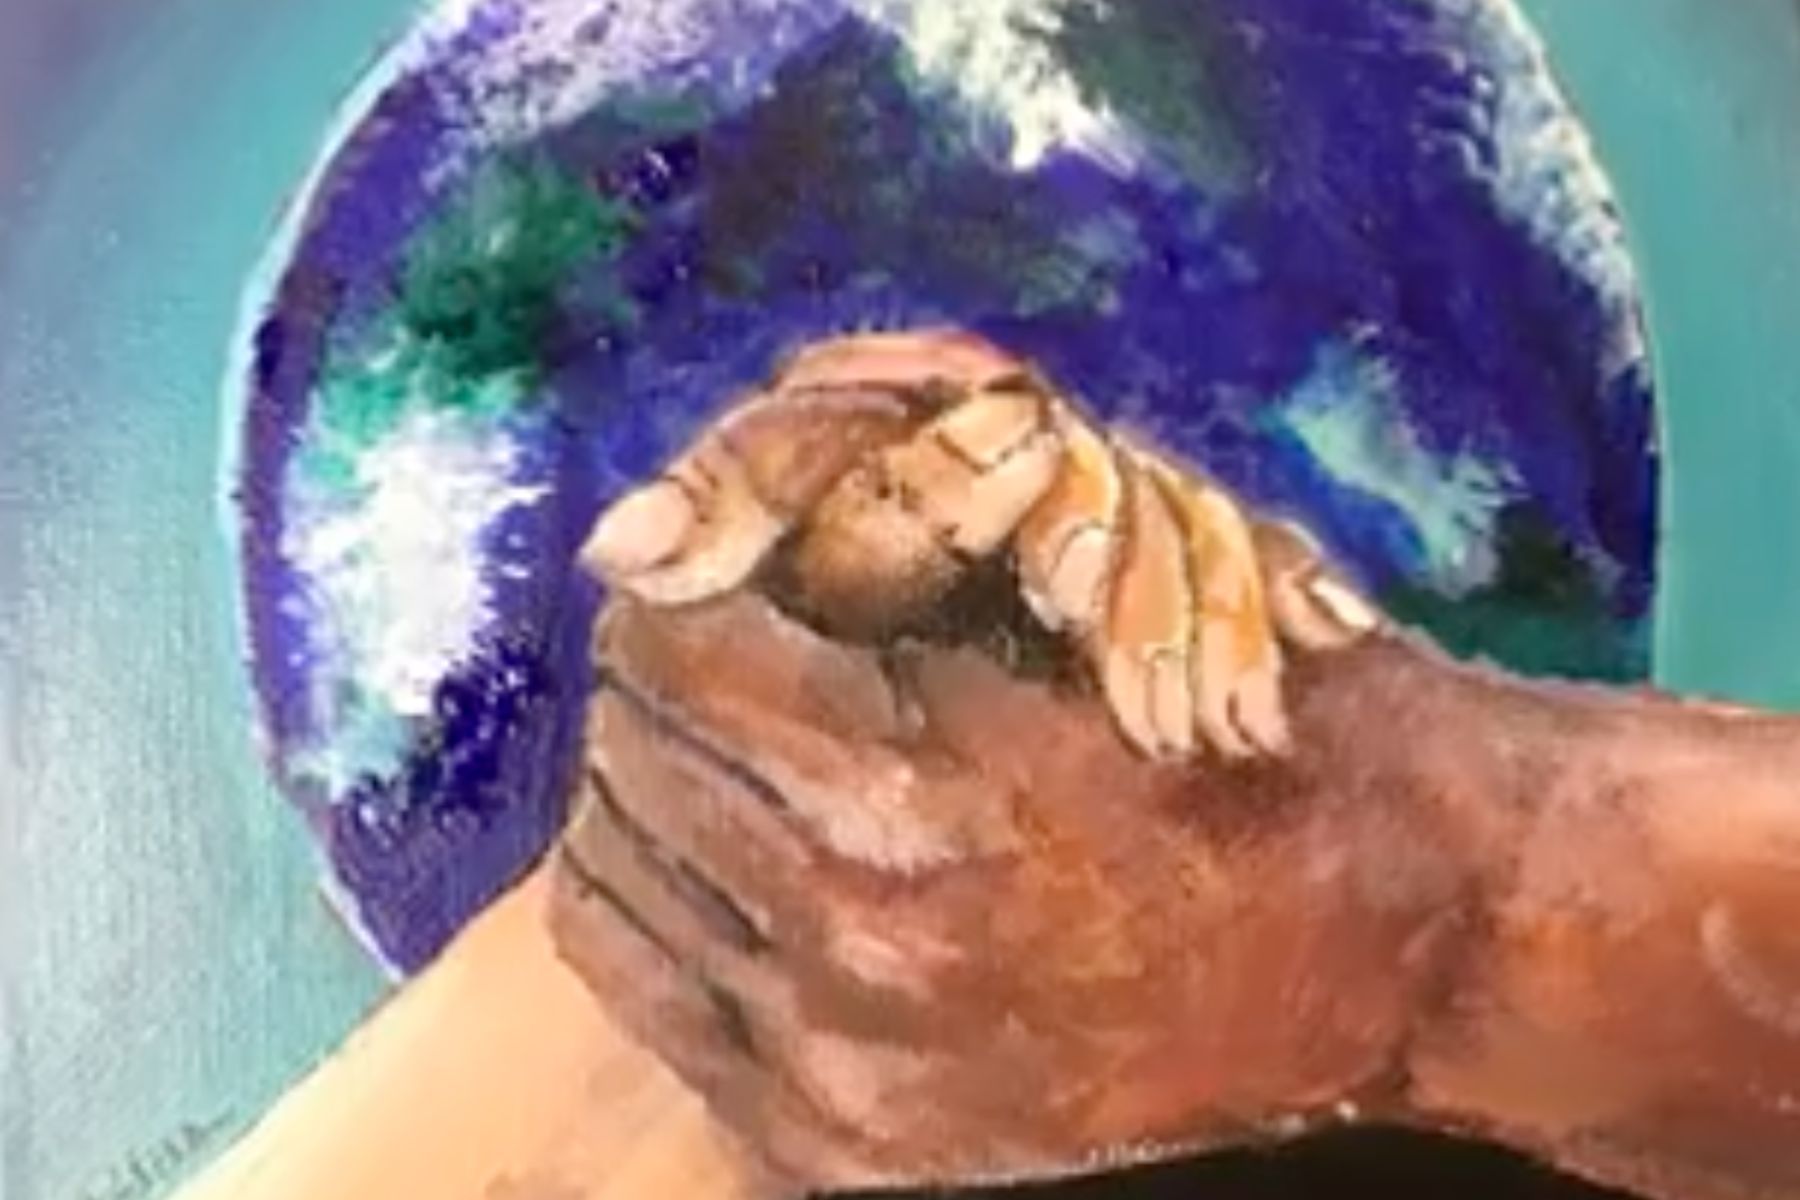 Two hands with different skin tones are clasped together. Behind the hands is an image of the world.